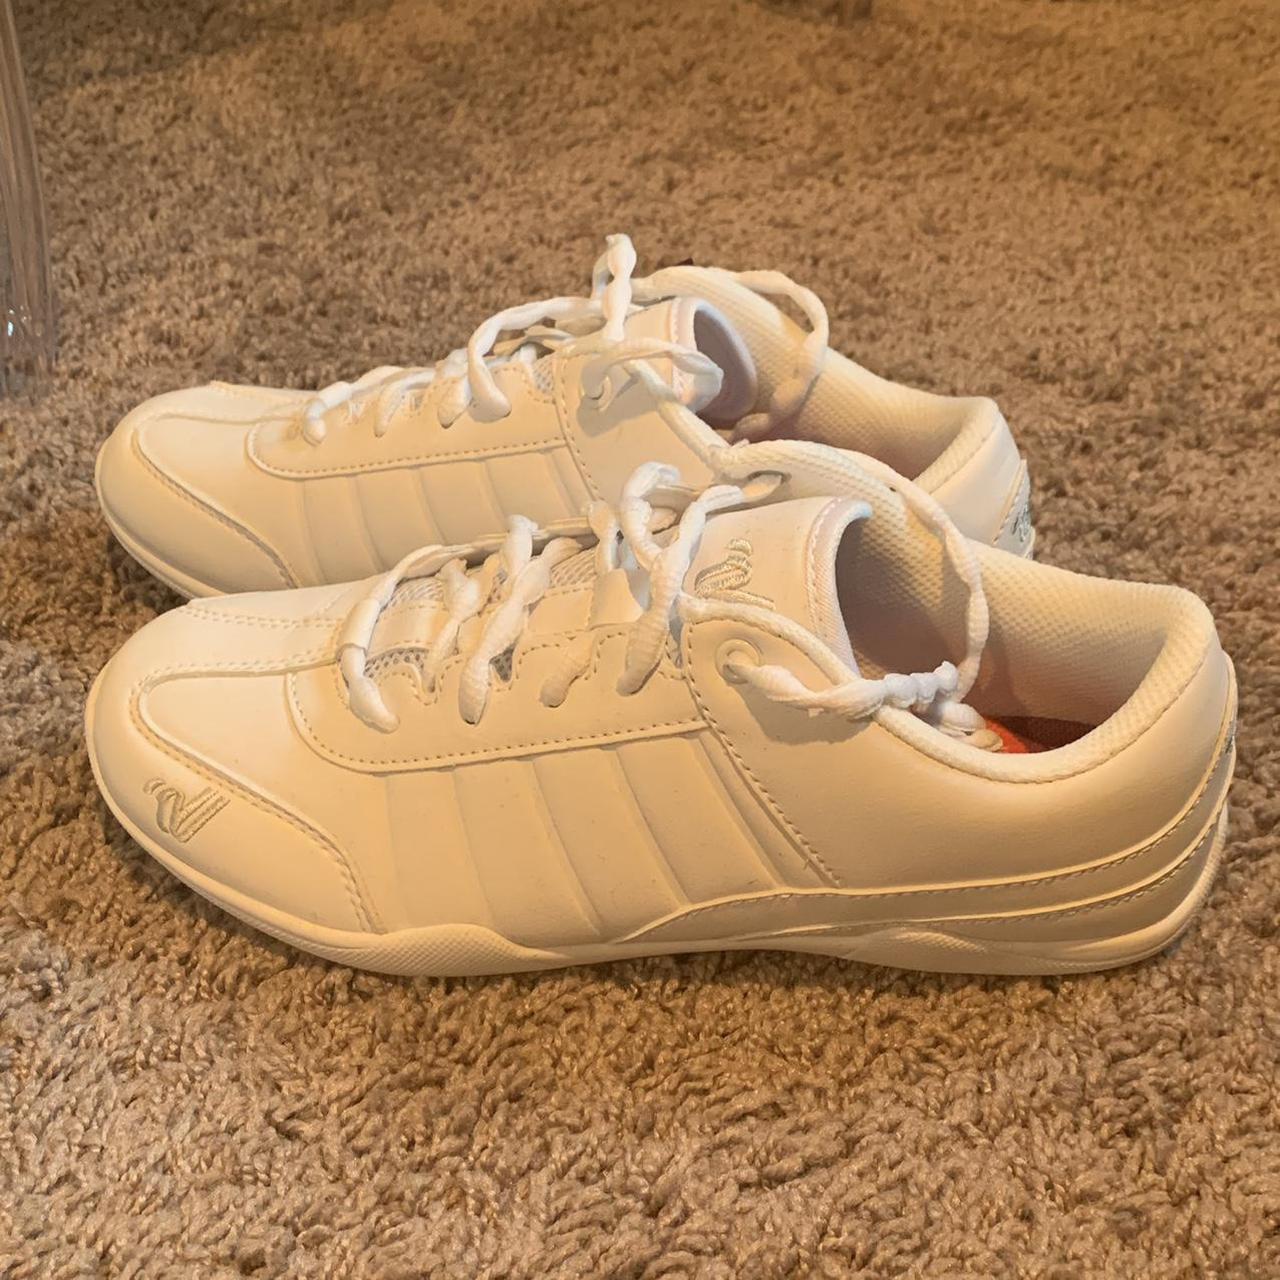 NFINITY | Shoes | Nfinity Night Flyte Cheer Shoes | Poshmark